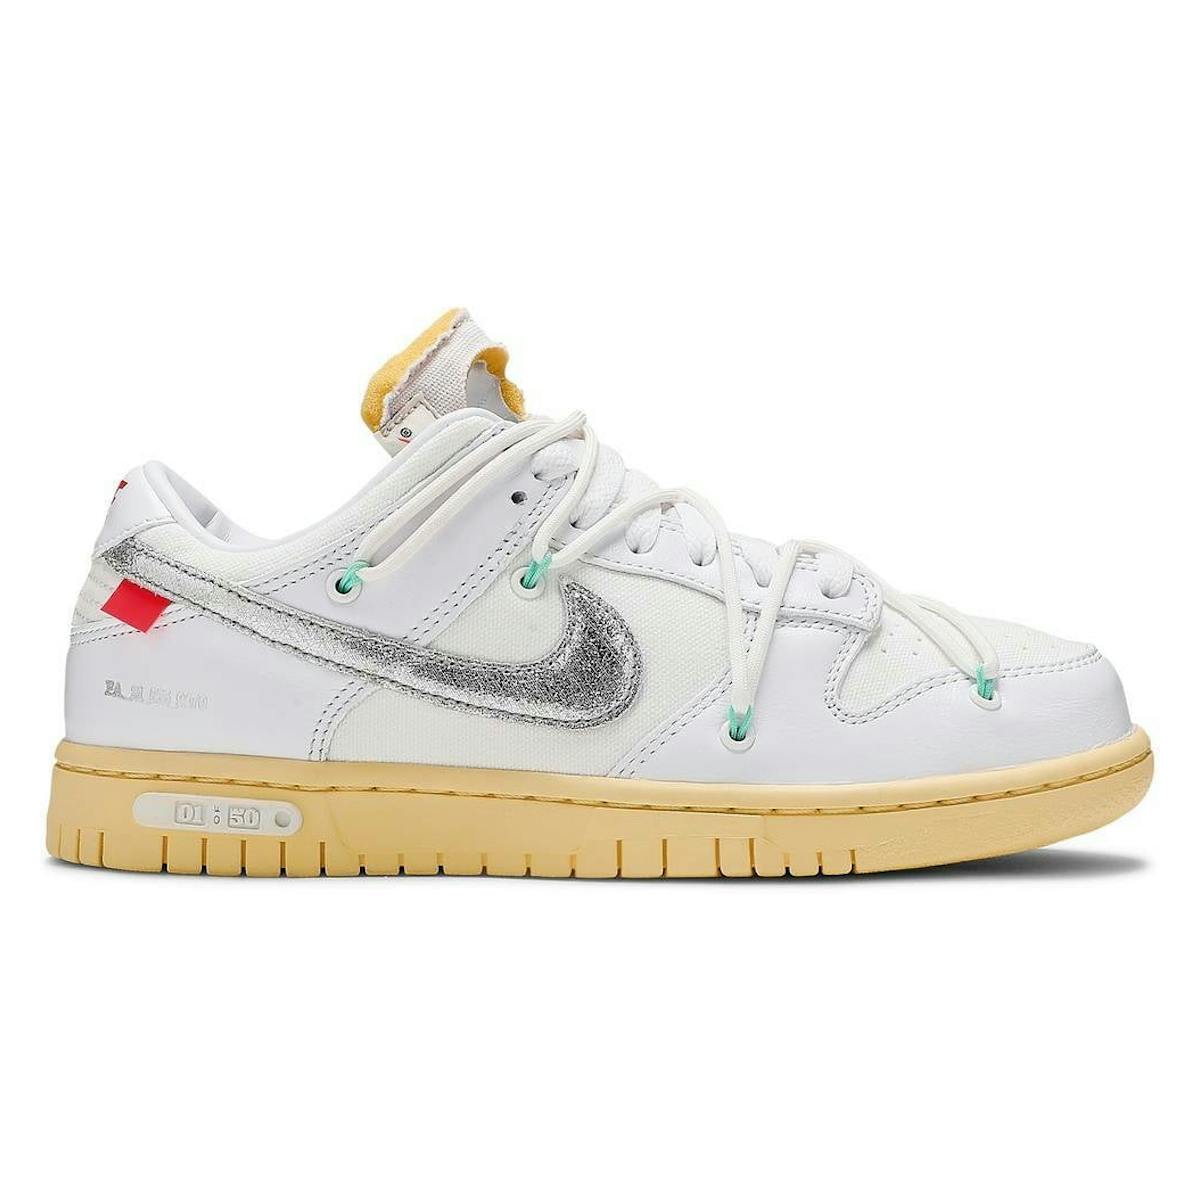 Off-White x Nike Dunk Low "Lot 01 of 50"